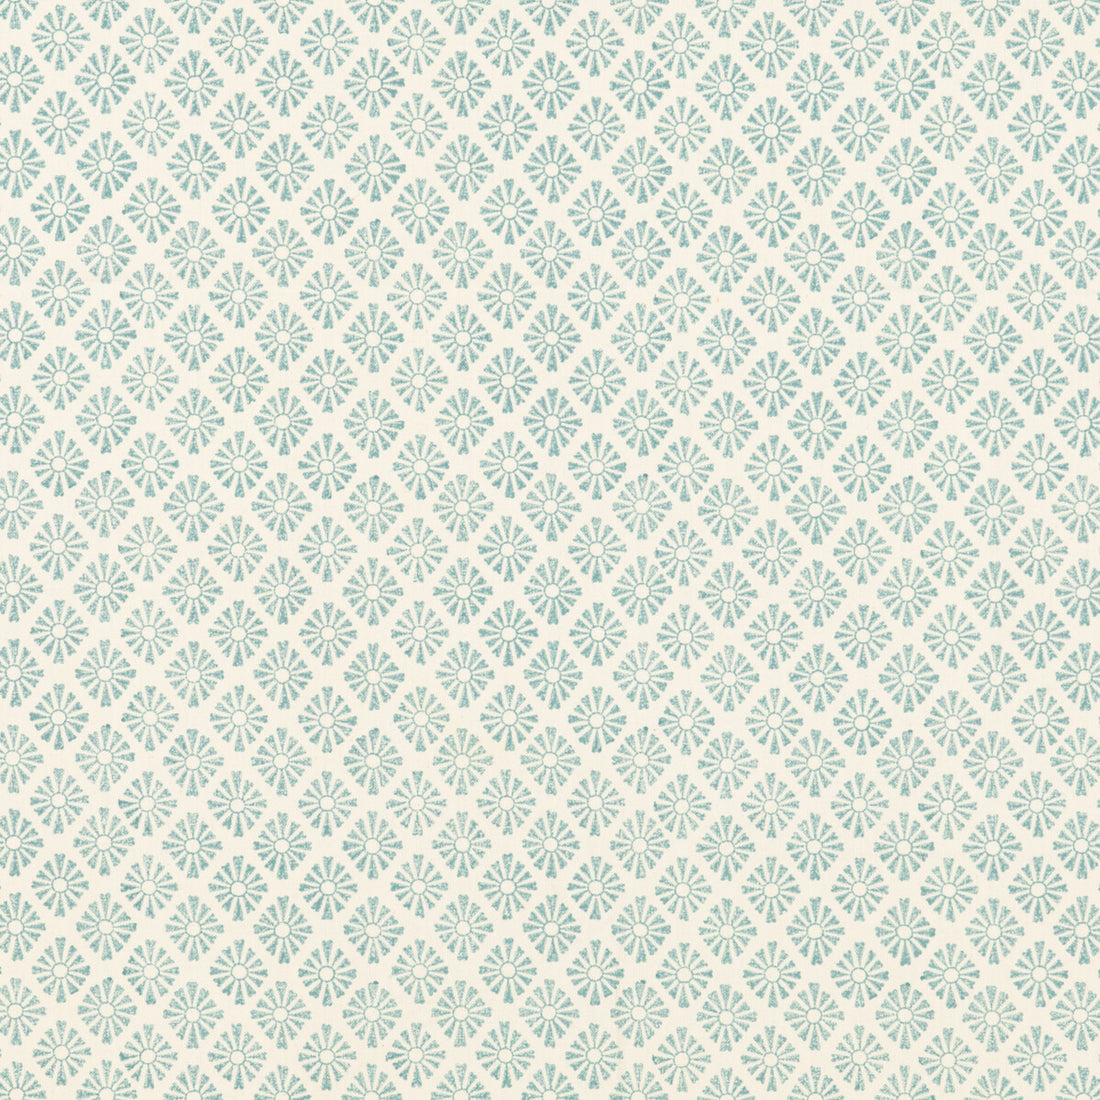 Sunburst fabric in aqua color - pattern PP50476.1.0 - by Baker Lifestyle in the Fiesta collection